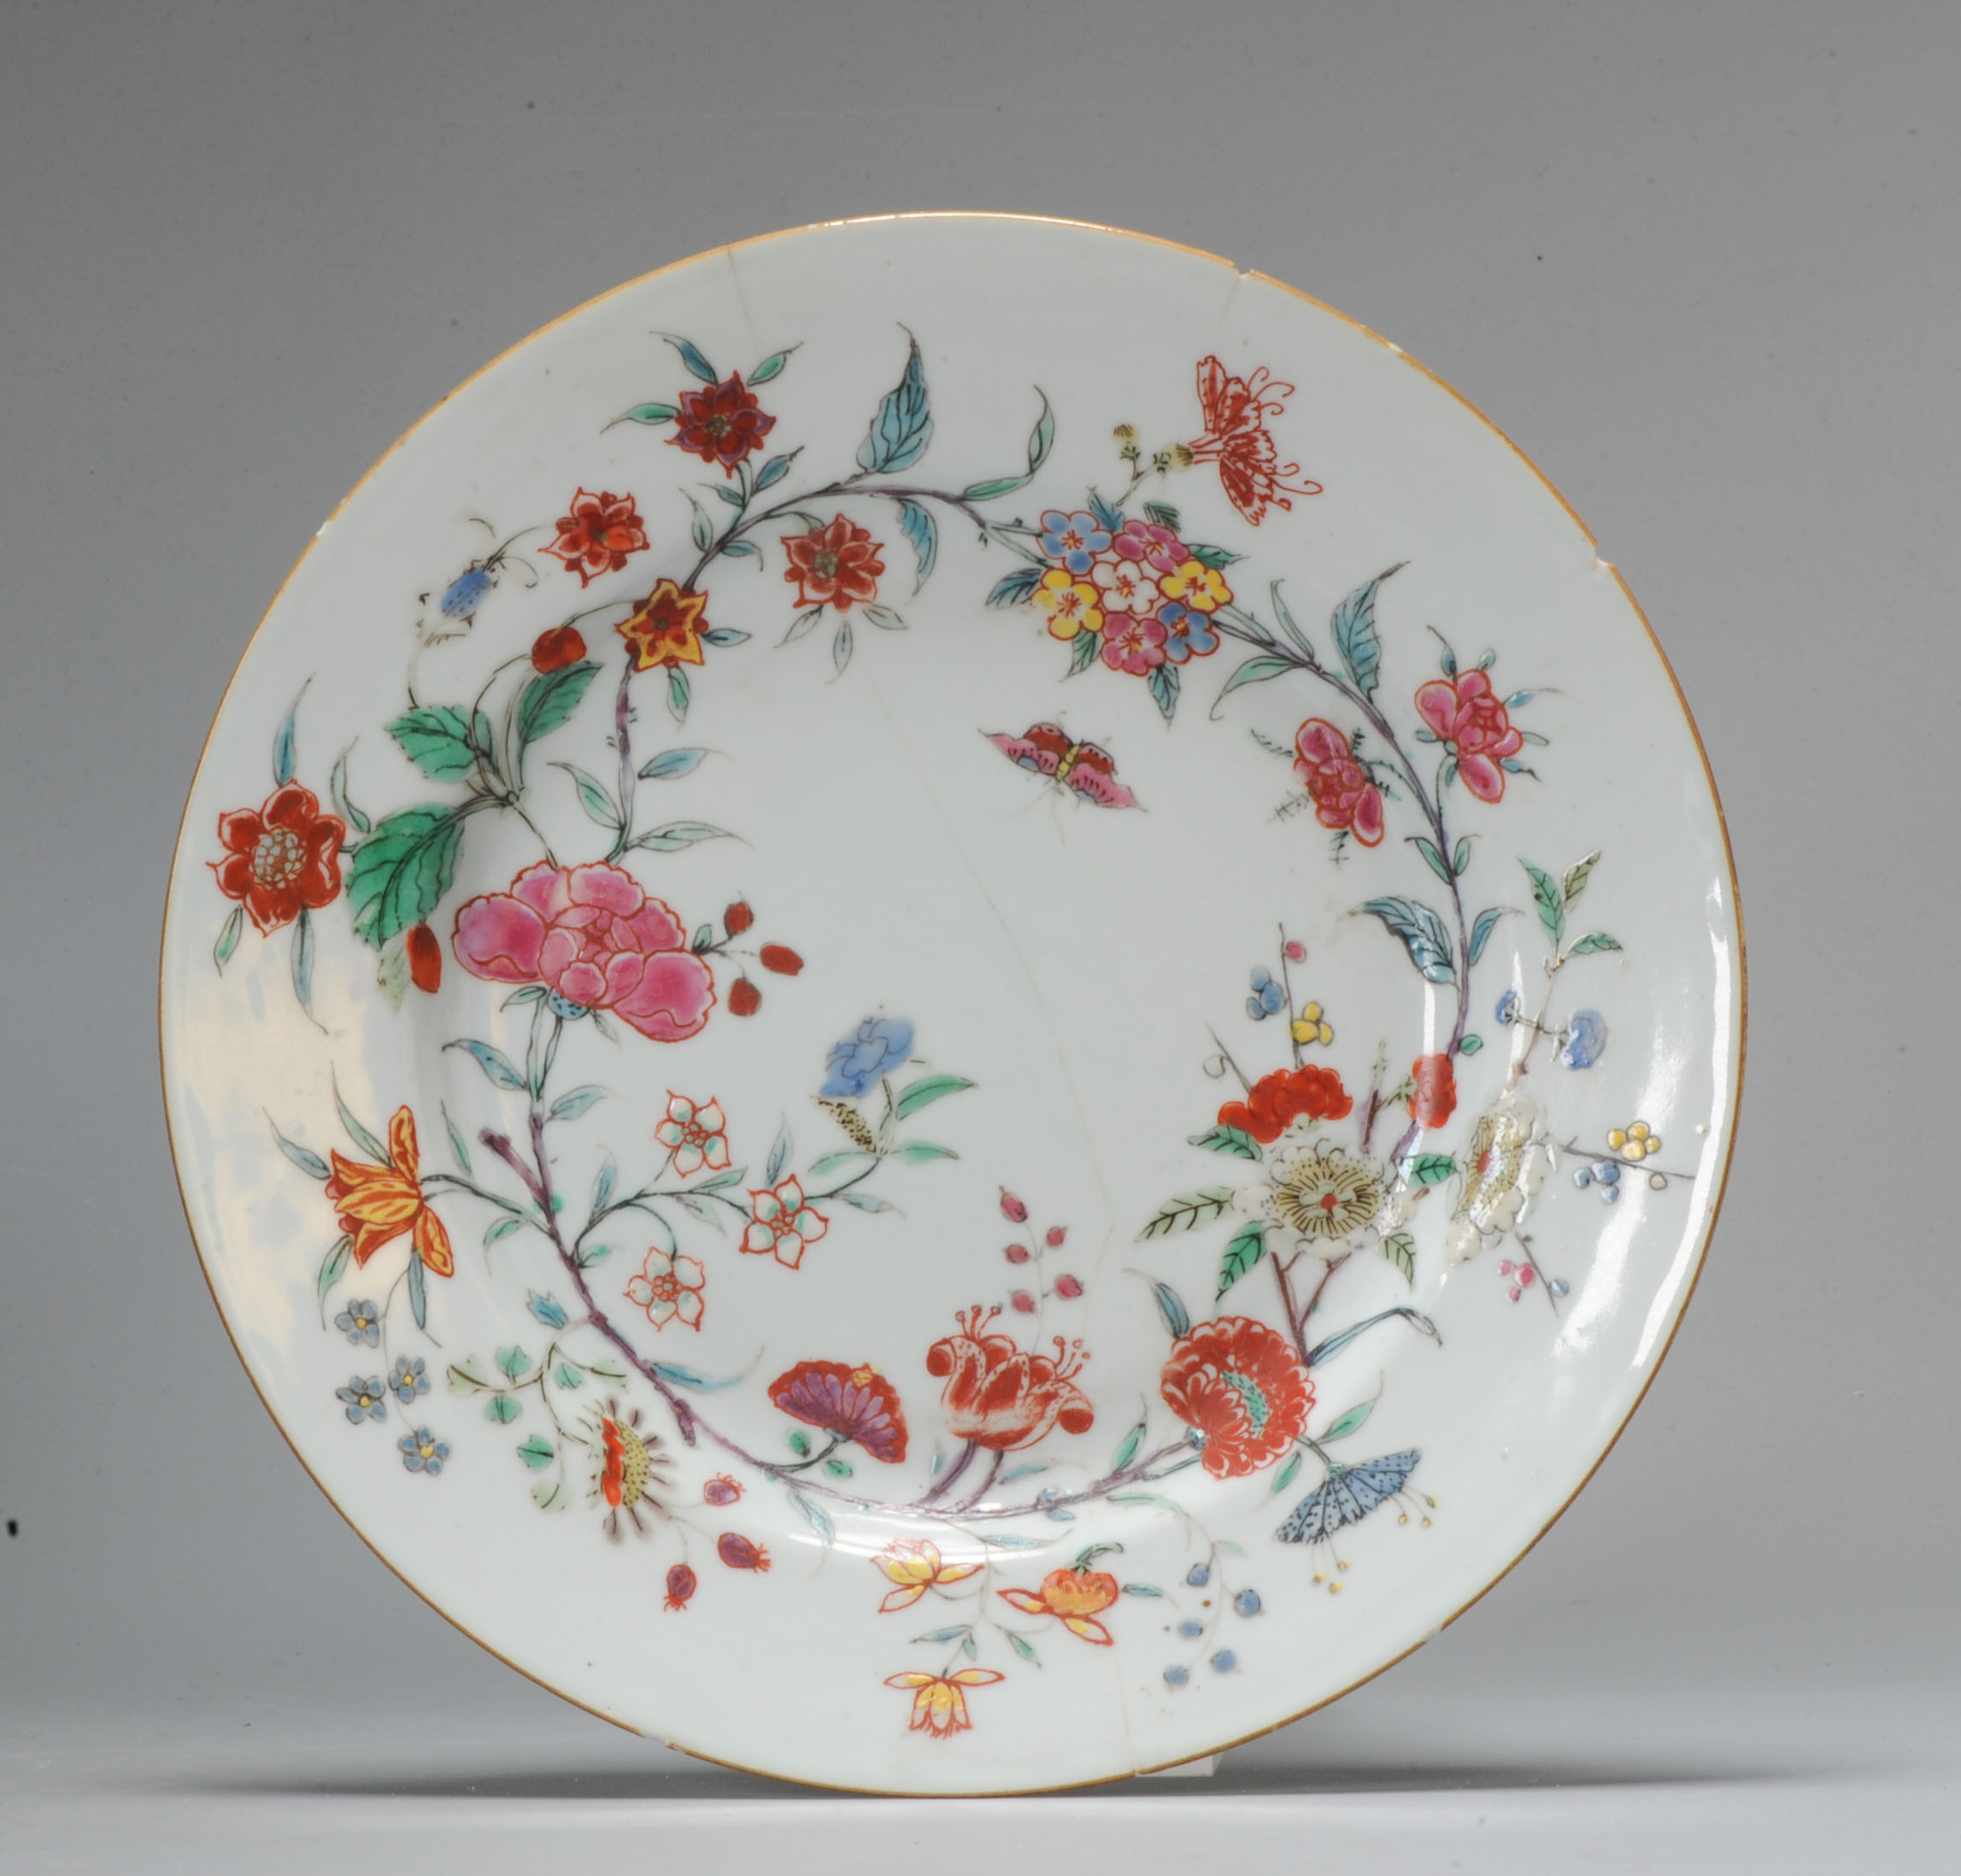 1002 Antique Chinese porcelain plate with Amsterdam Bont Floral Decoration